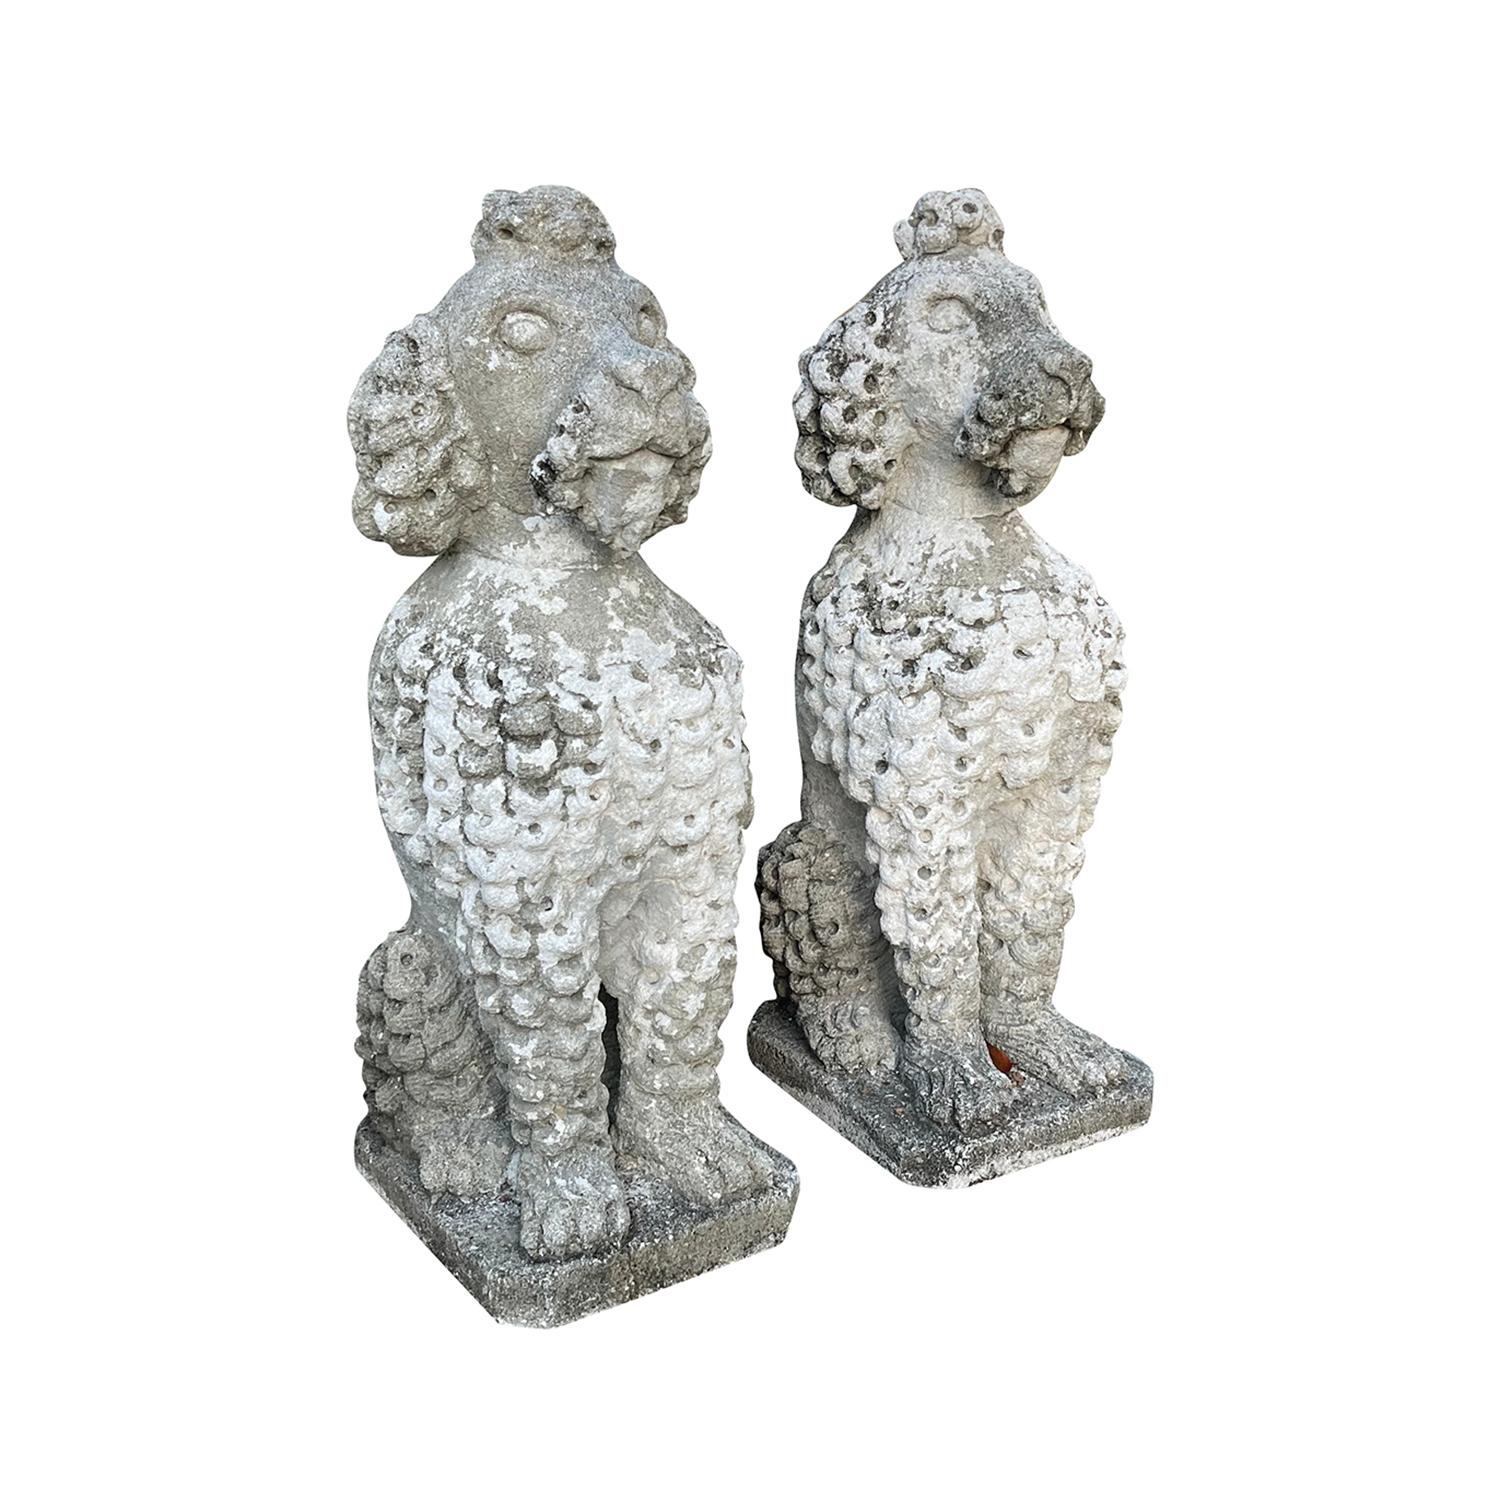 Hand-Carved 20th Century Vintage Pair of French Dog Poodle Garden Statues For Sale